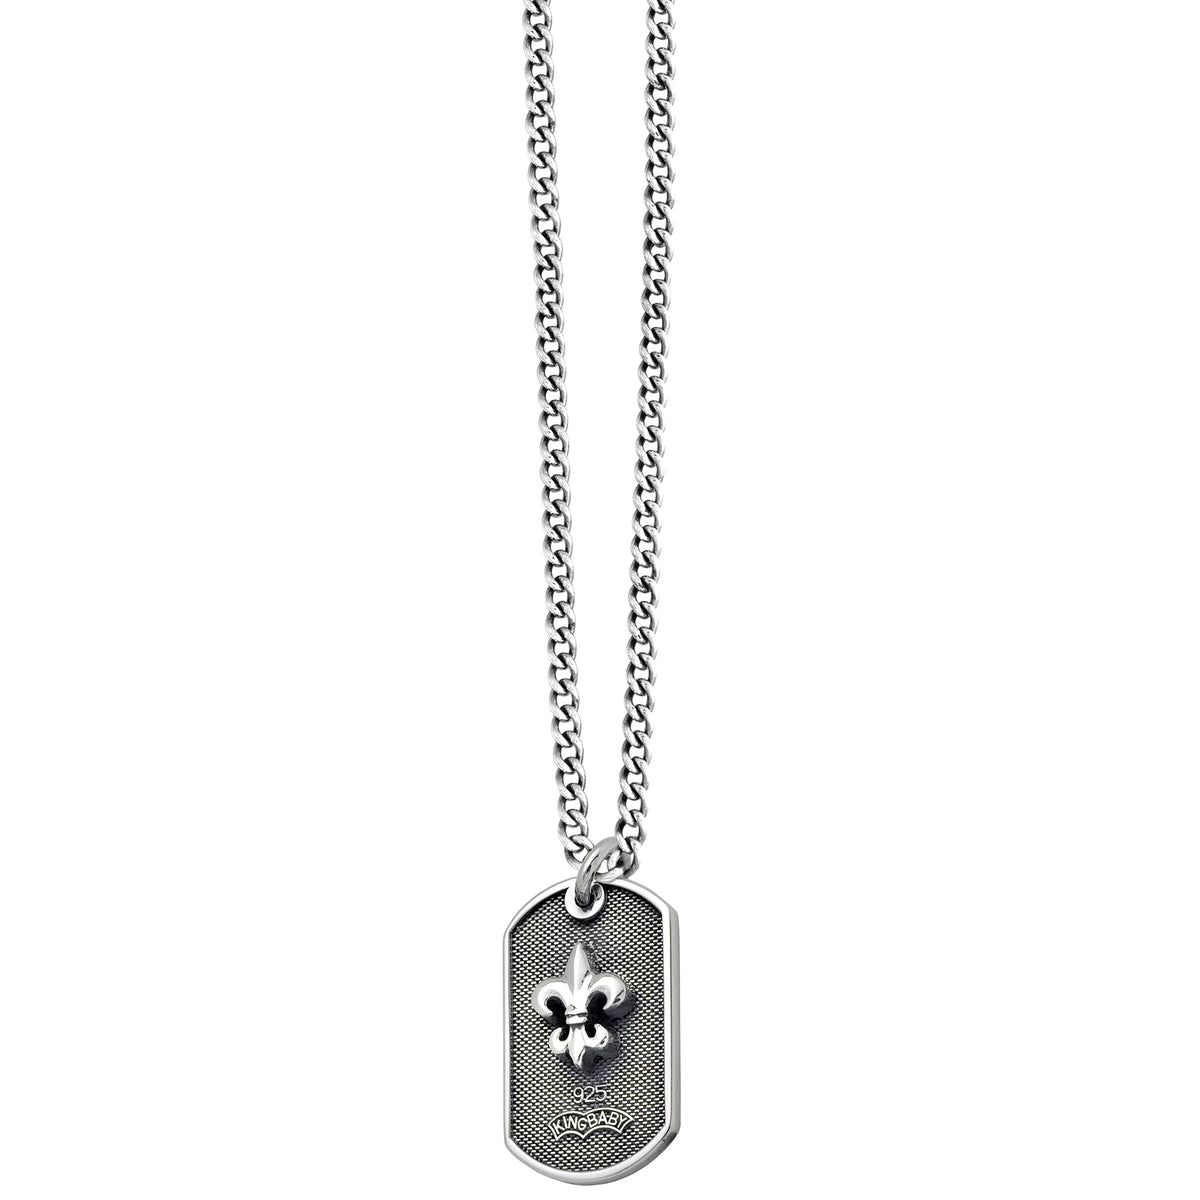 King Baby Classic EAGLE SHIELD Small Dog Tag Necklace in Sterling Silver